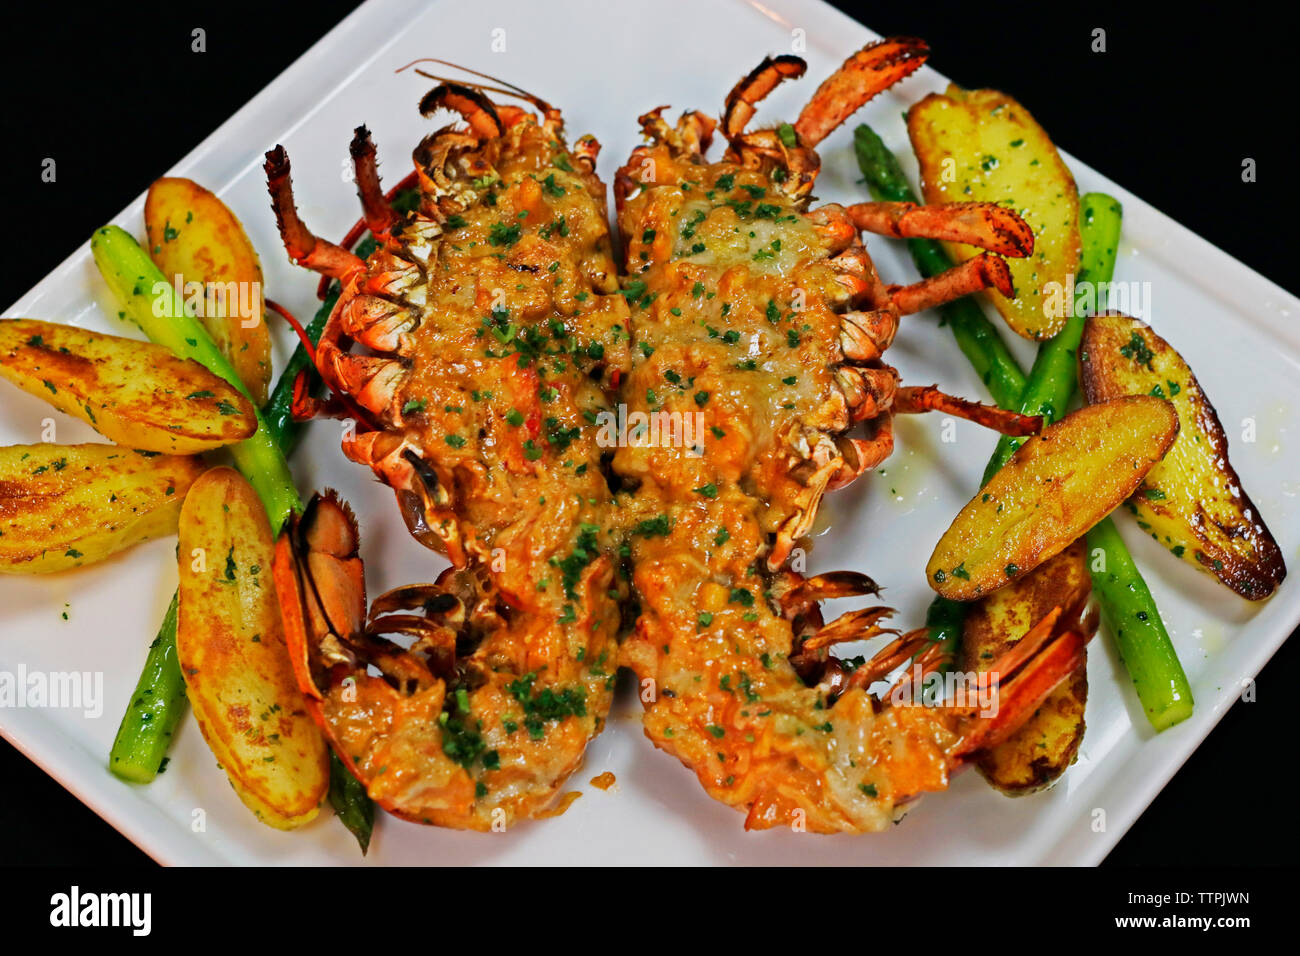 Canadian Maine lobster thermidor with black background Stock Photo